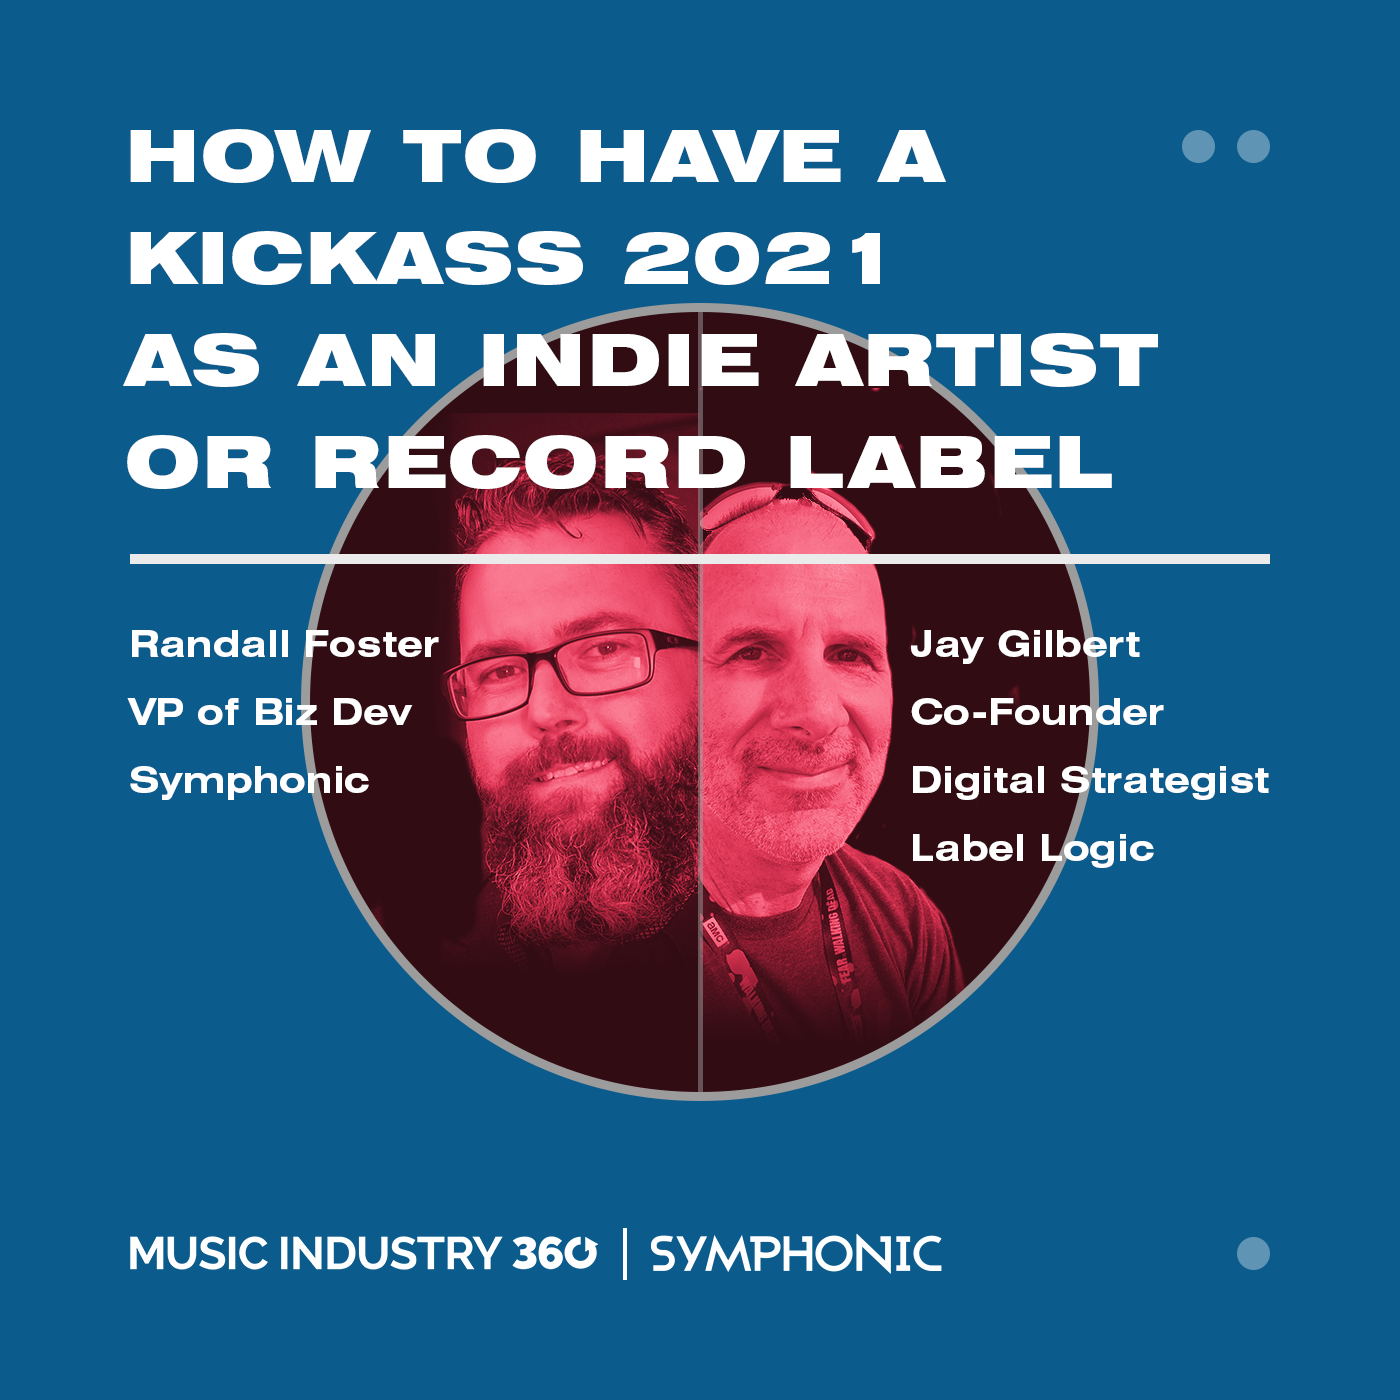 How To Have a Kickass Year as an Independent Artist or Record Label | Music Industry 360 Podcast